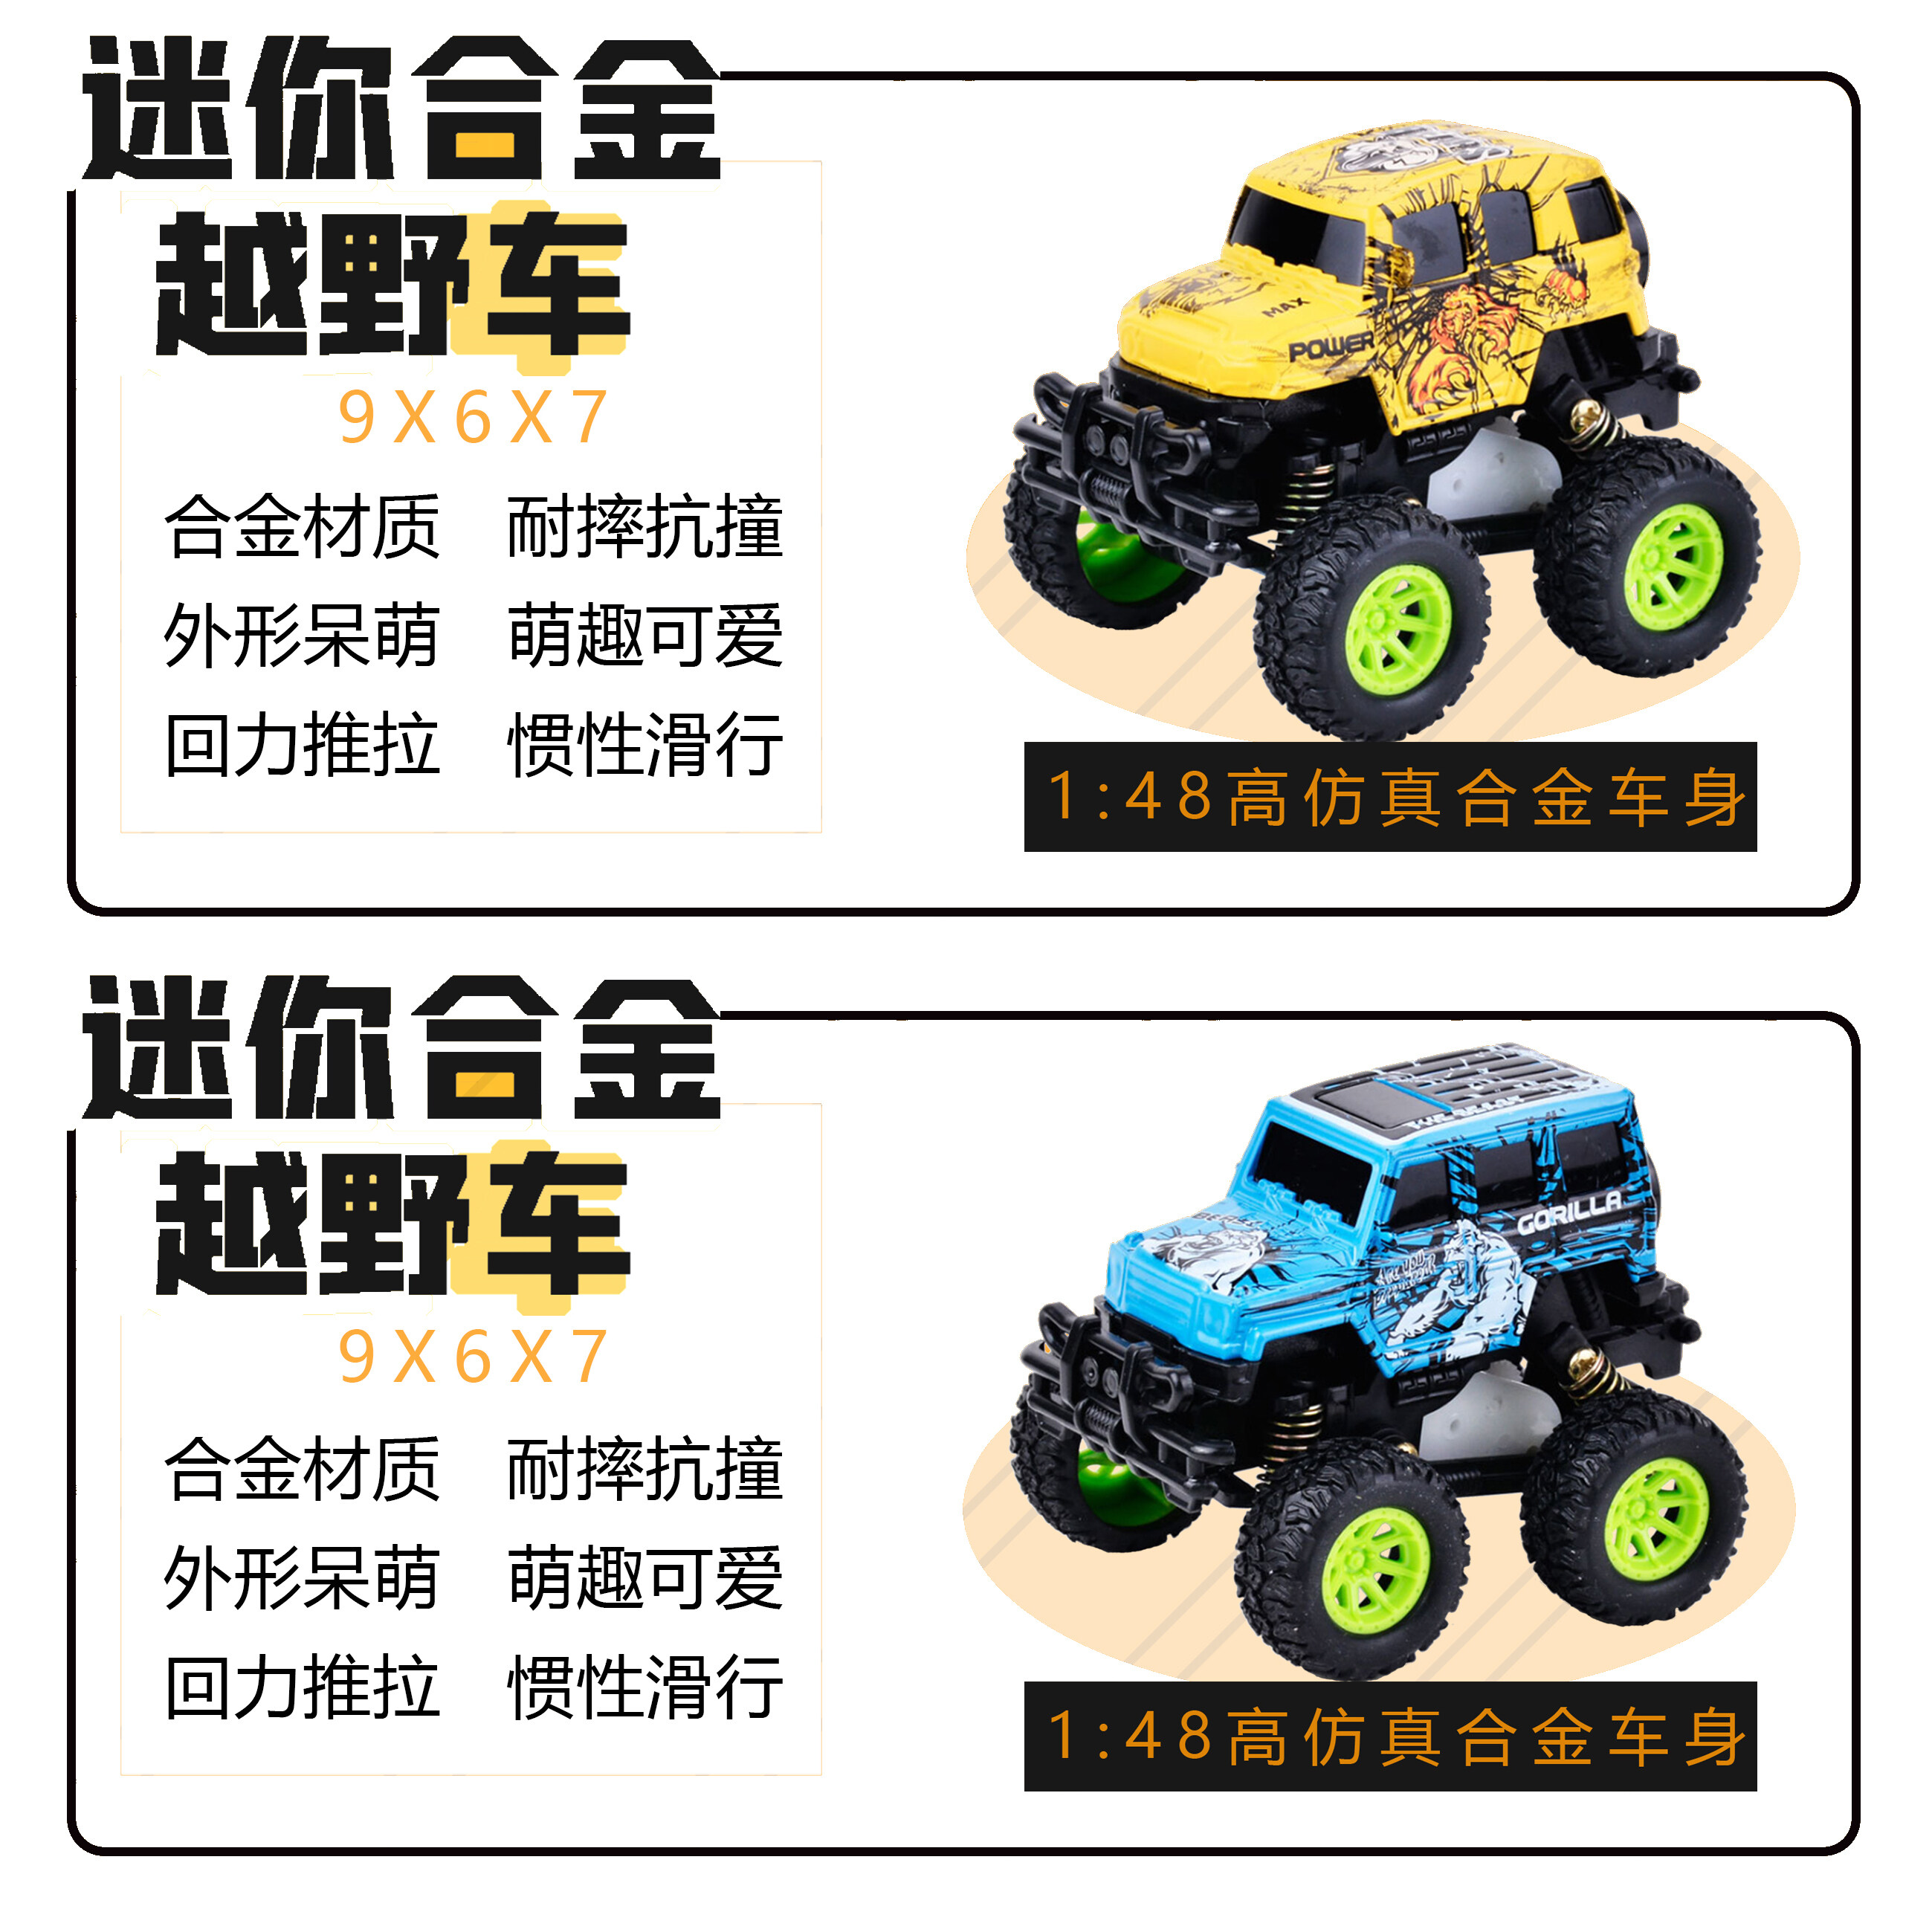 off road car toy, wholesale diecast toy cars, diecast toy car manufacturers